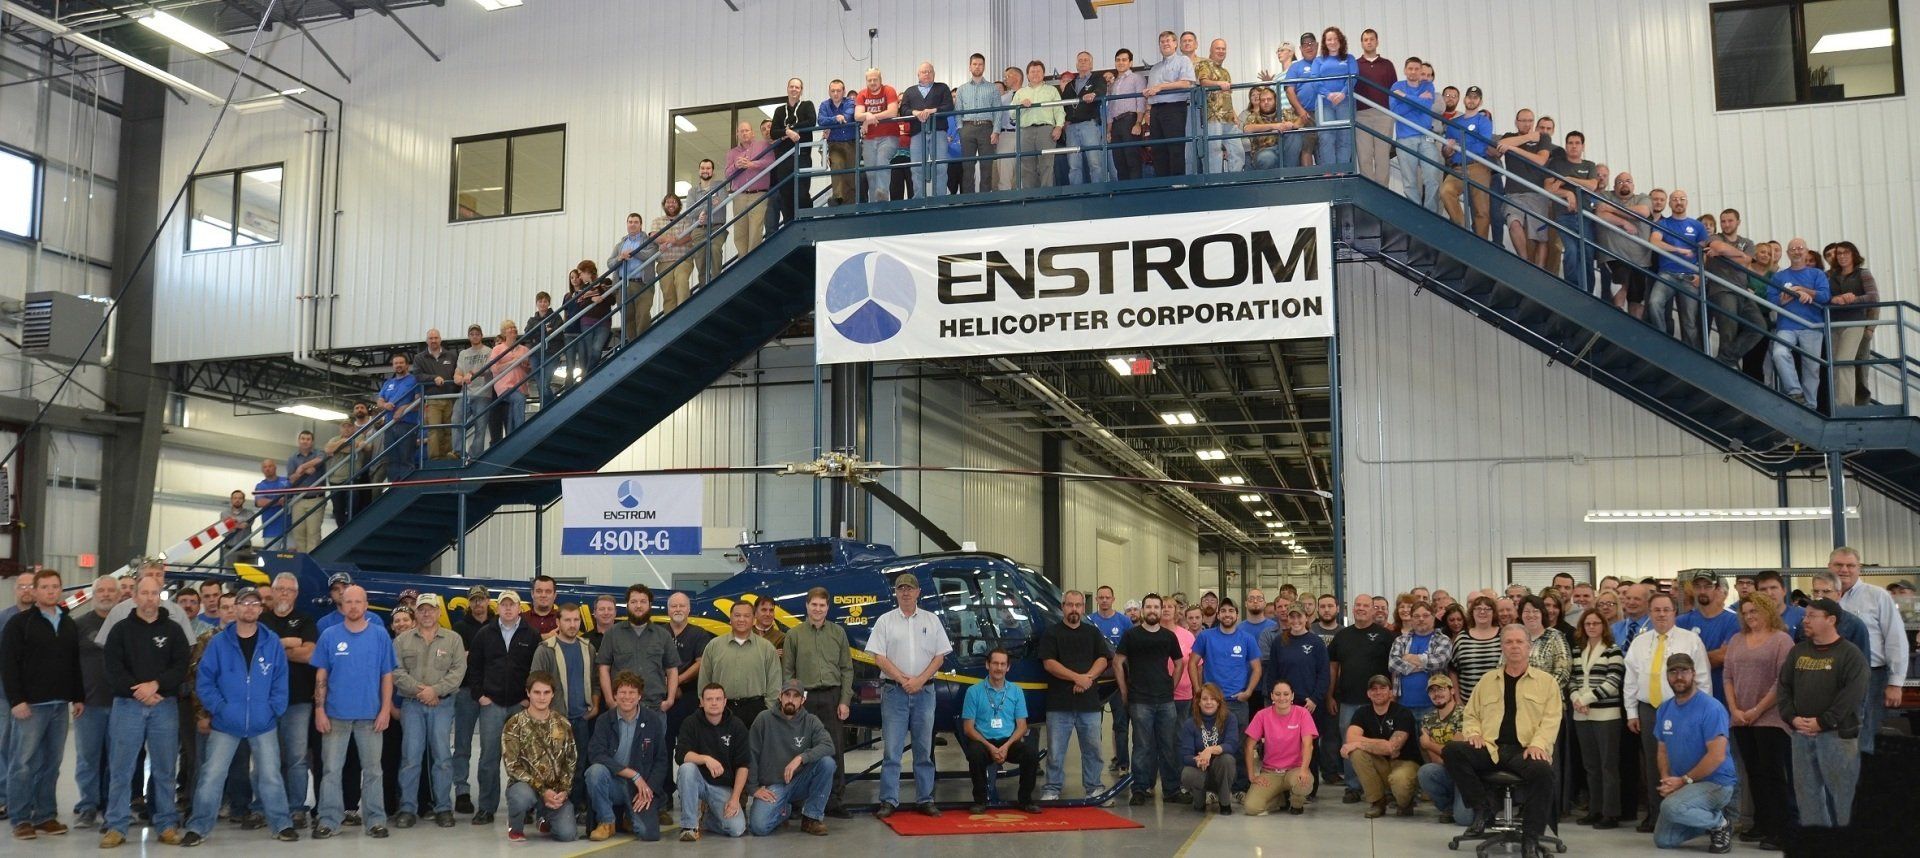 Enstrom Helicopter Files for Bankruptcy After 64-Year Run